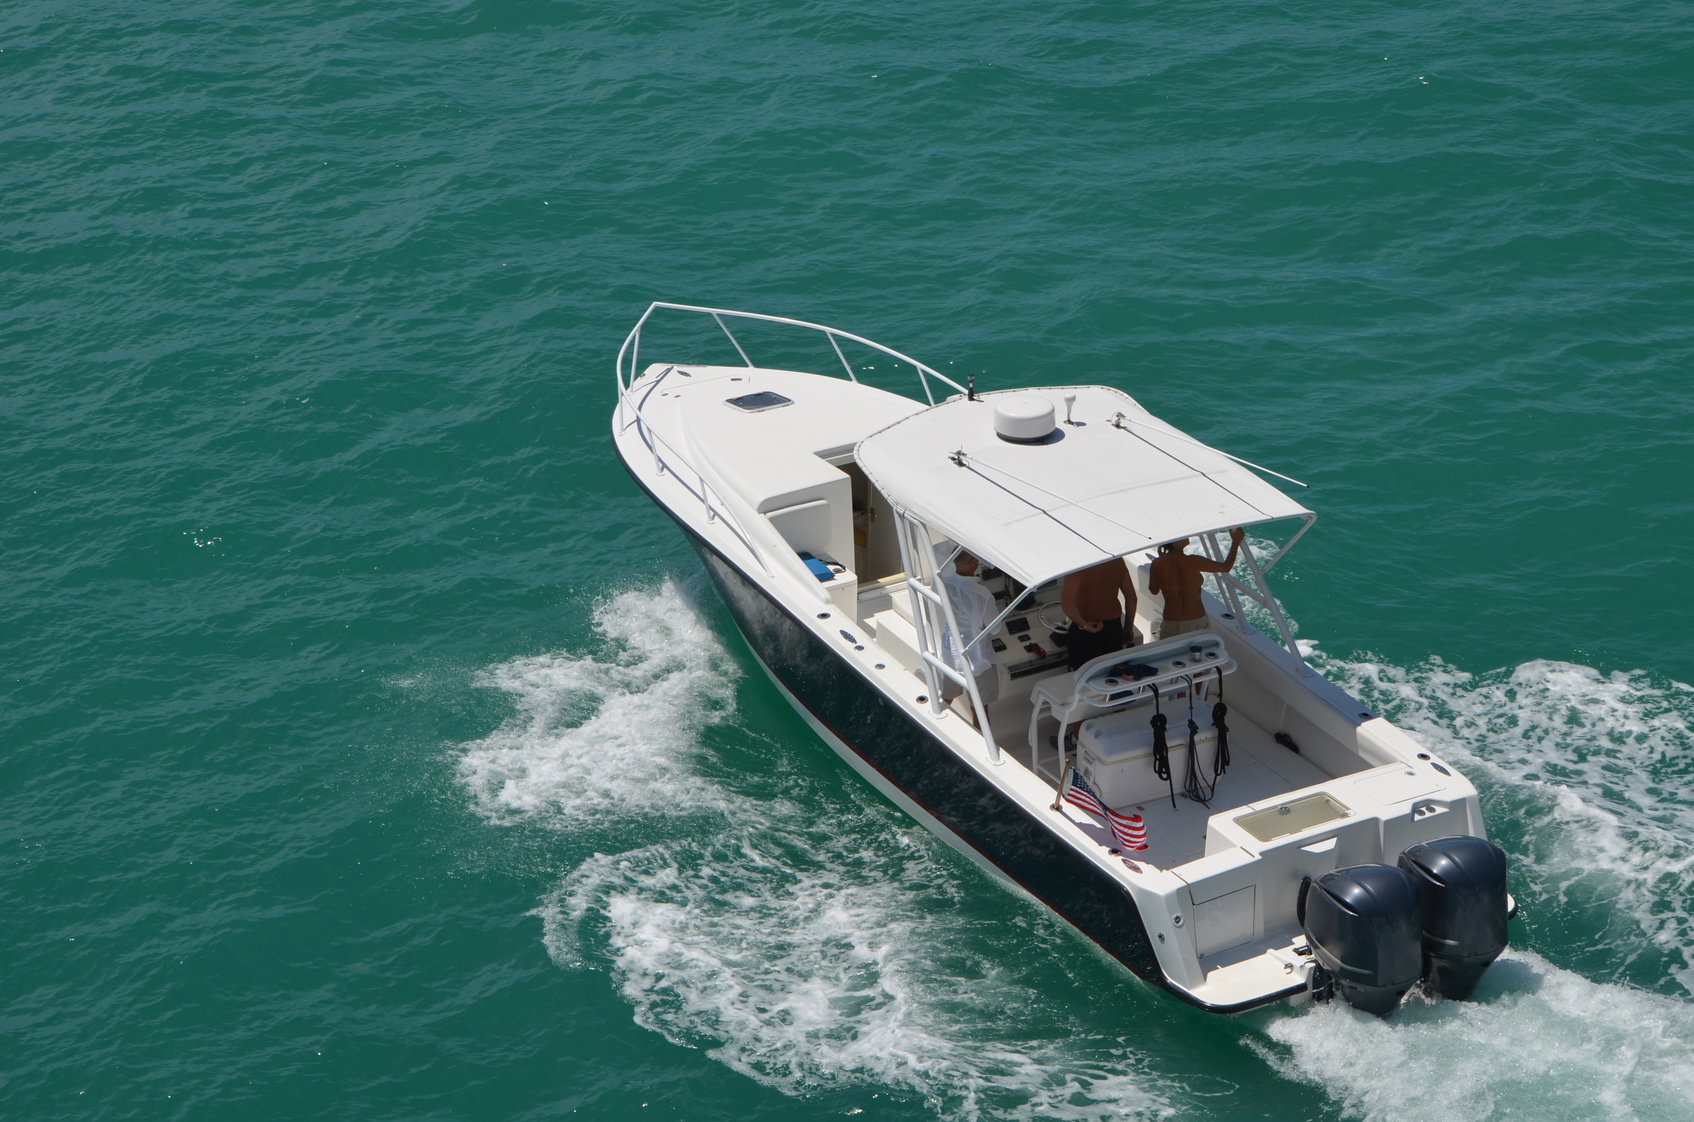 Getting the Best Boat Engine For You - Weight Out Your Options